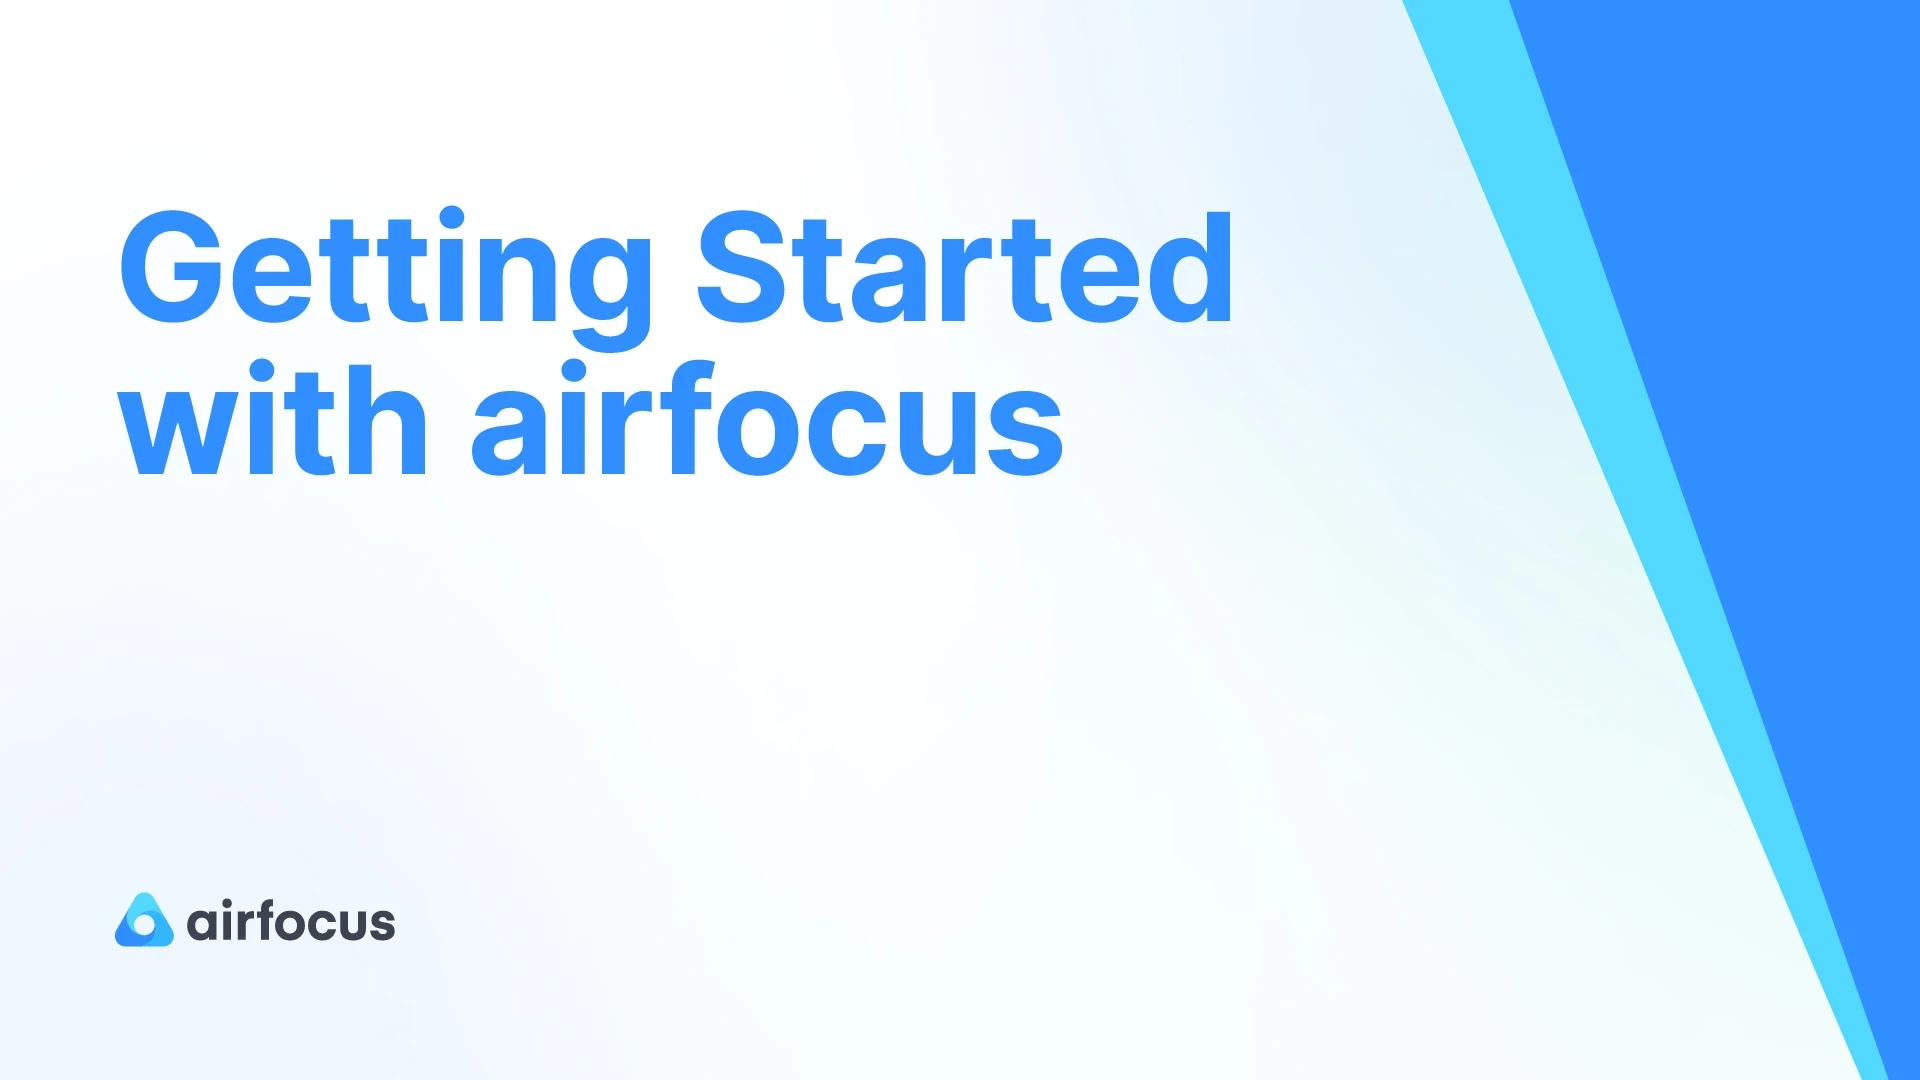 Getting Started with airfocus